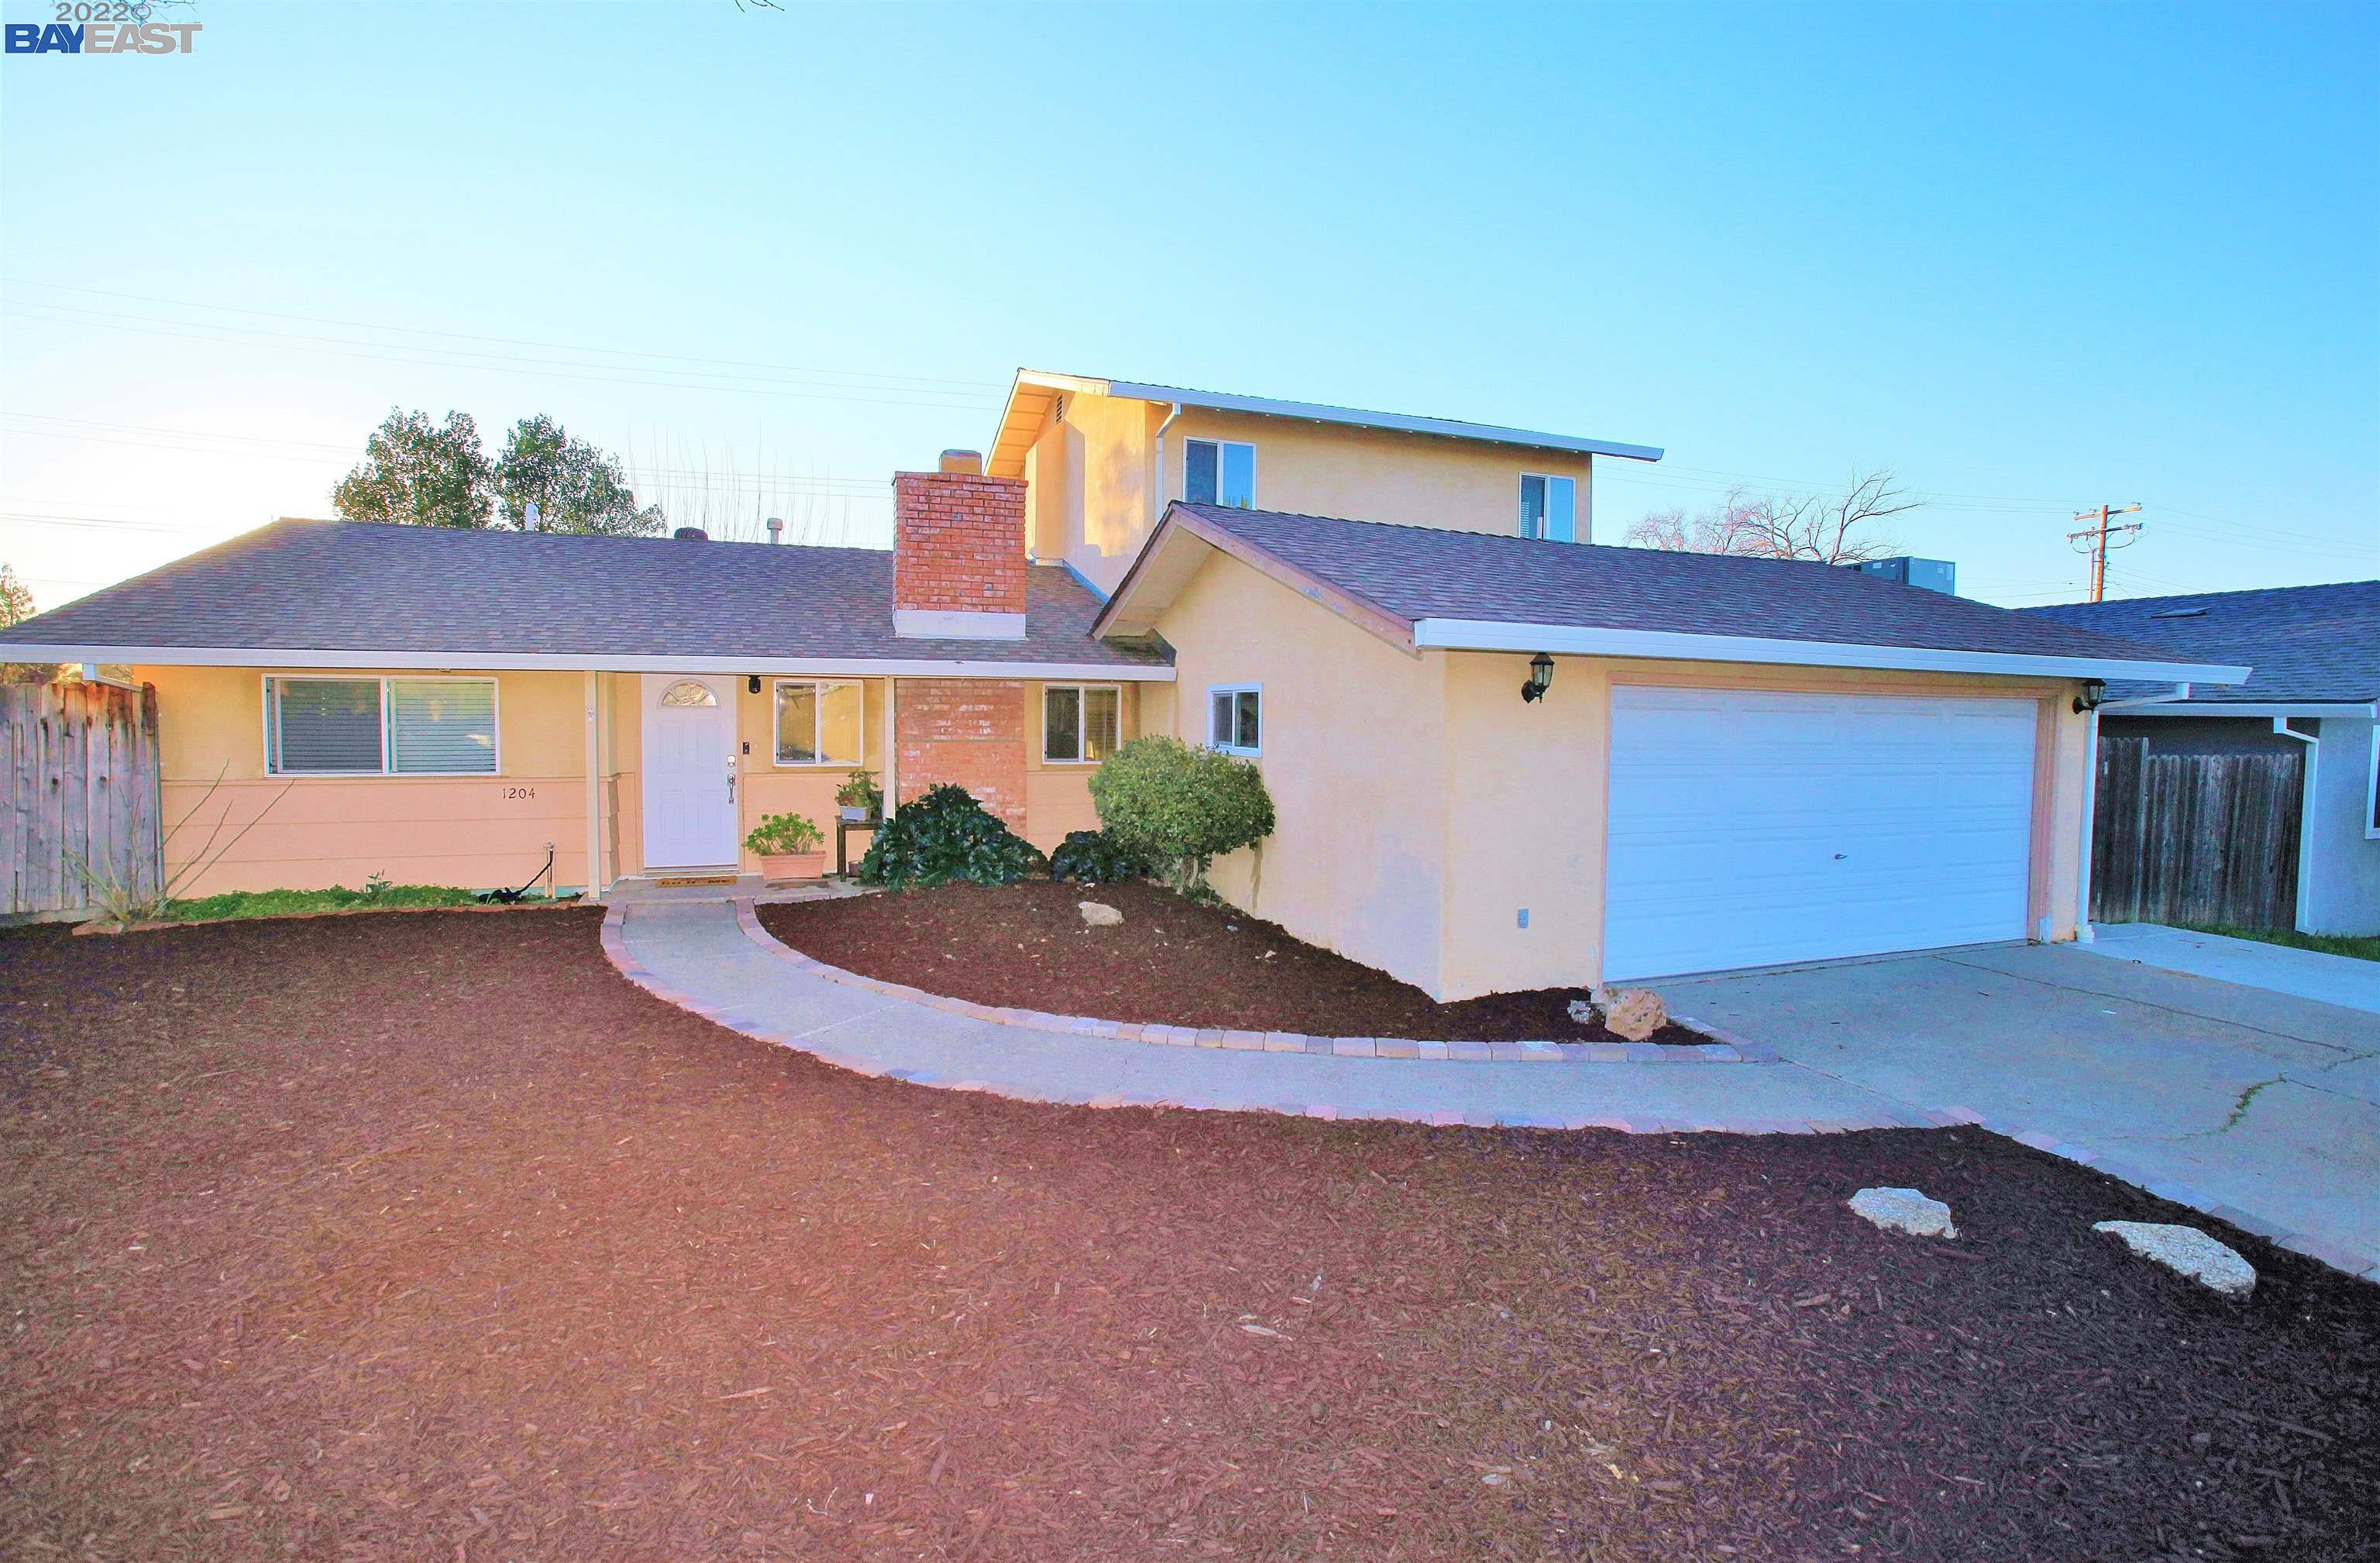 Photo of 1204 Palm Ave in Roseville, CA